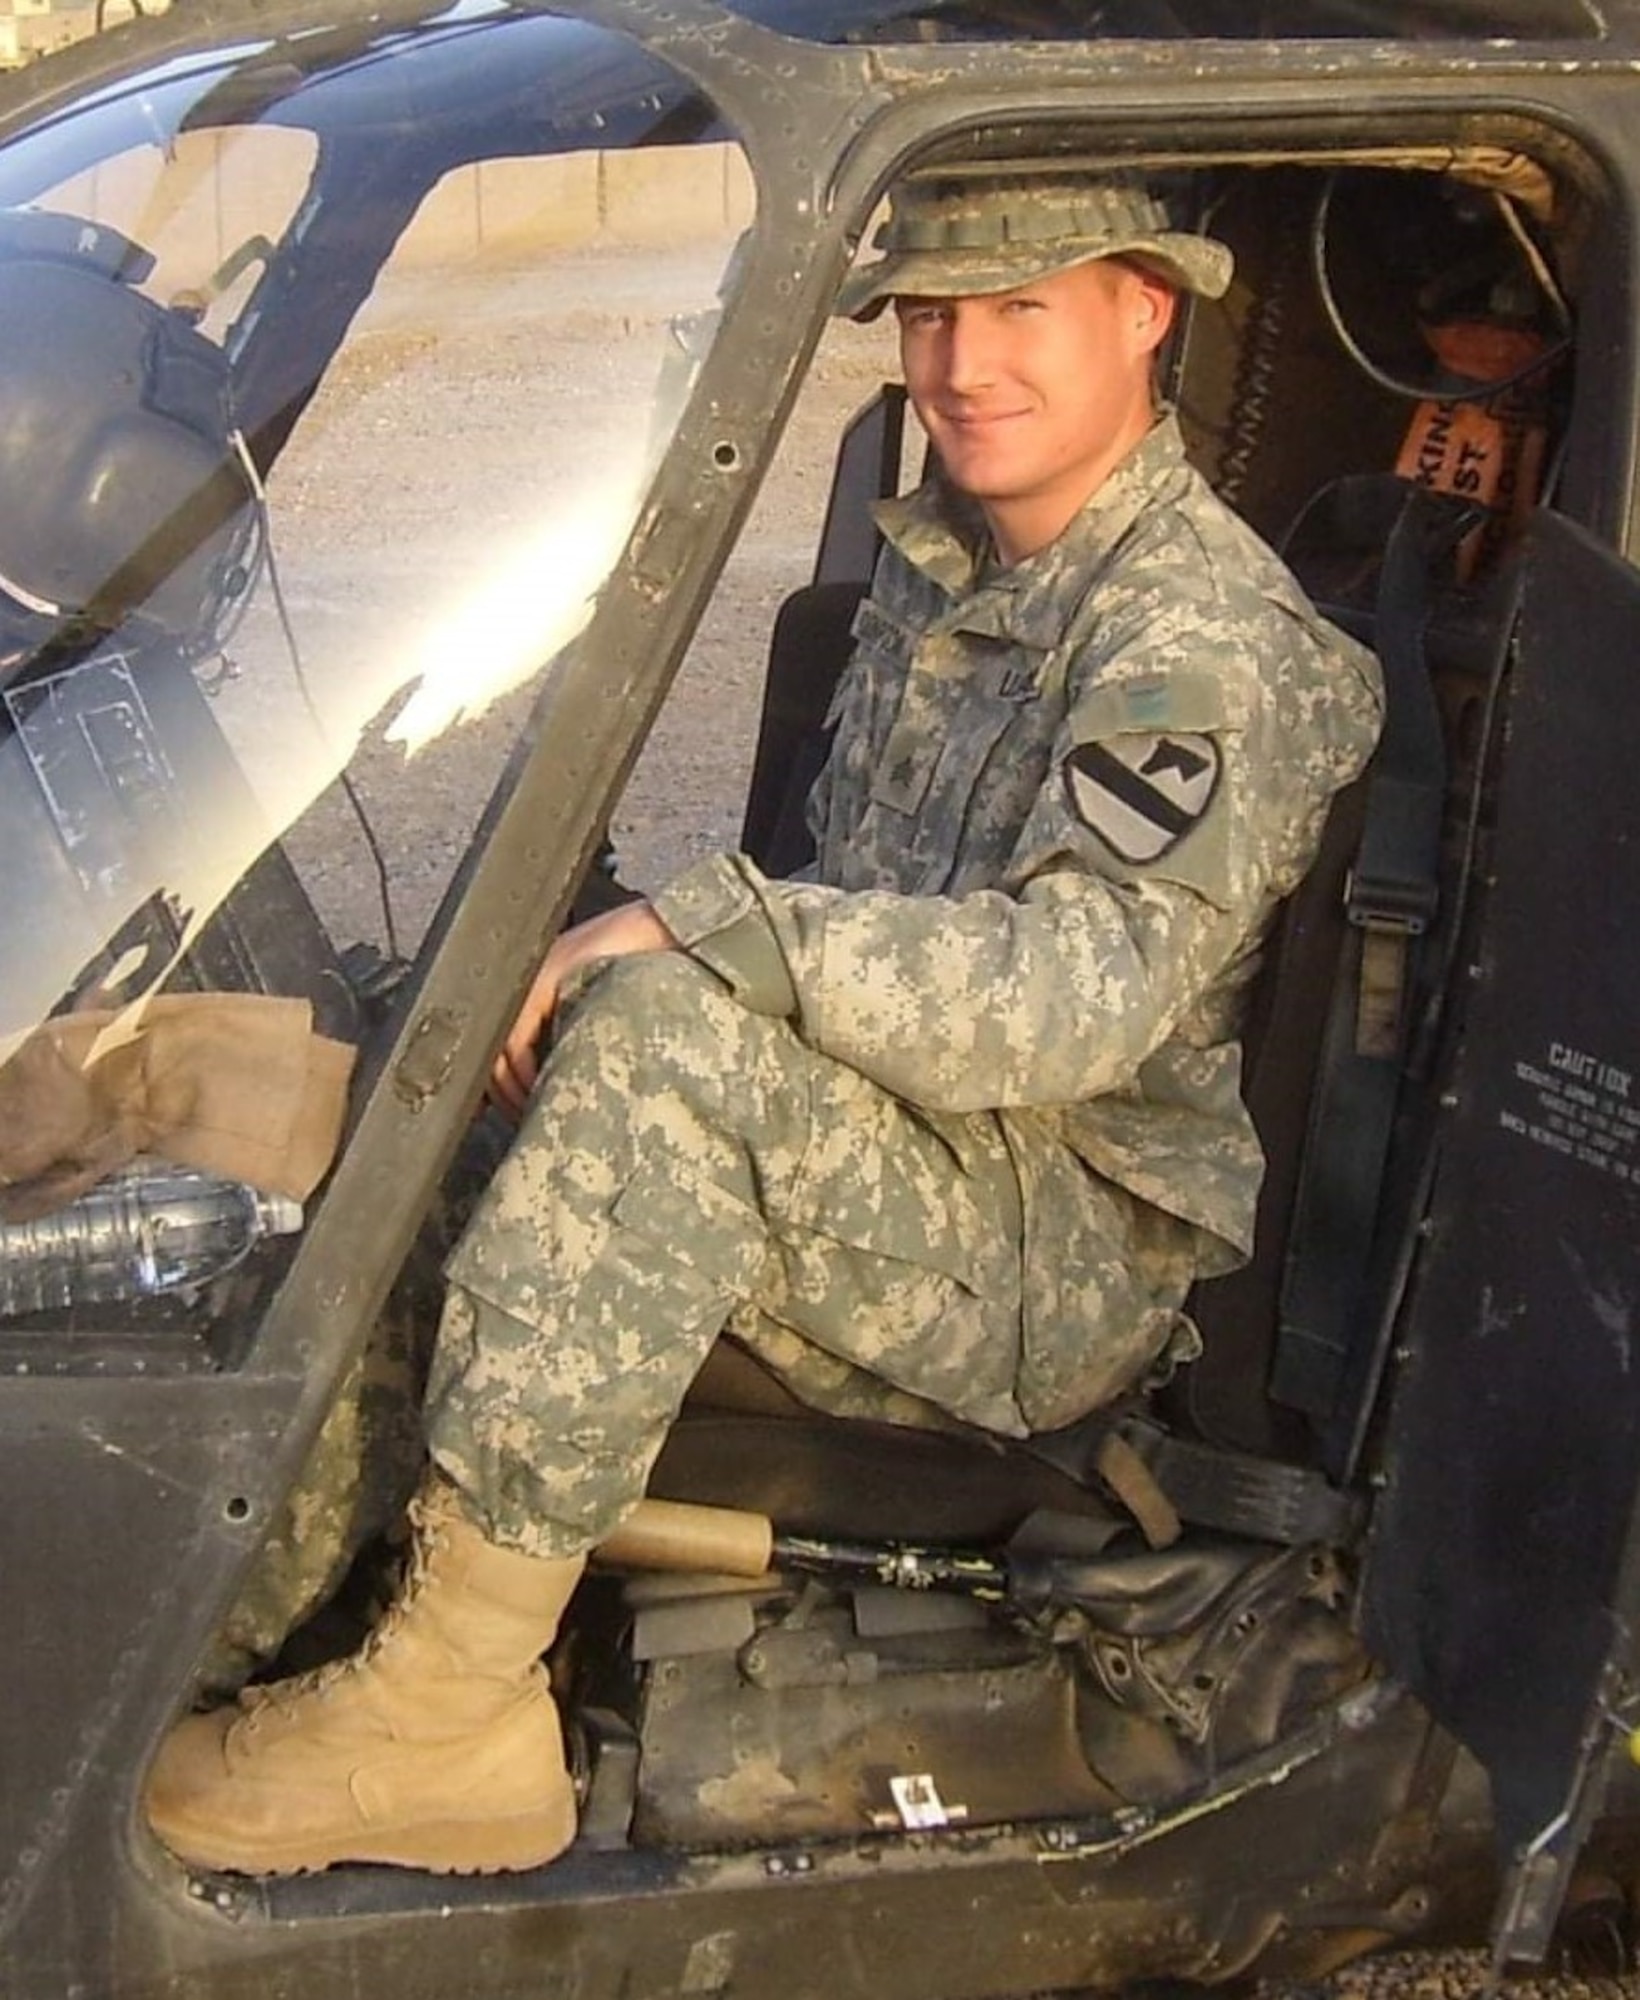 Man in military uniform sitting in a military vehicle